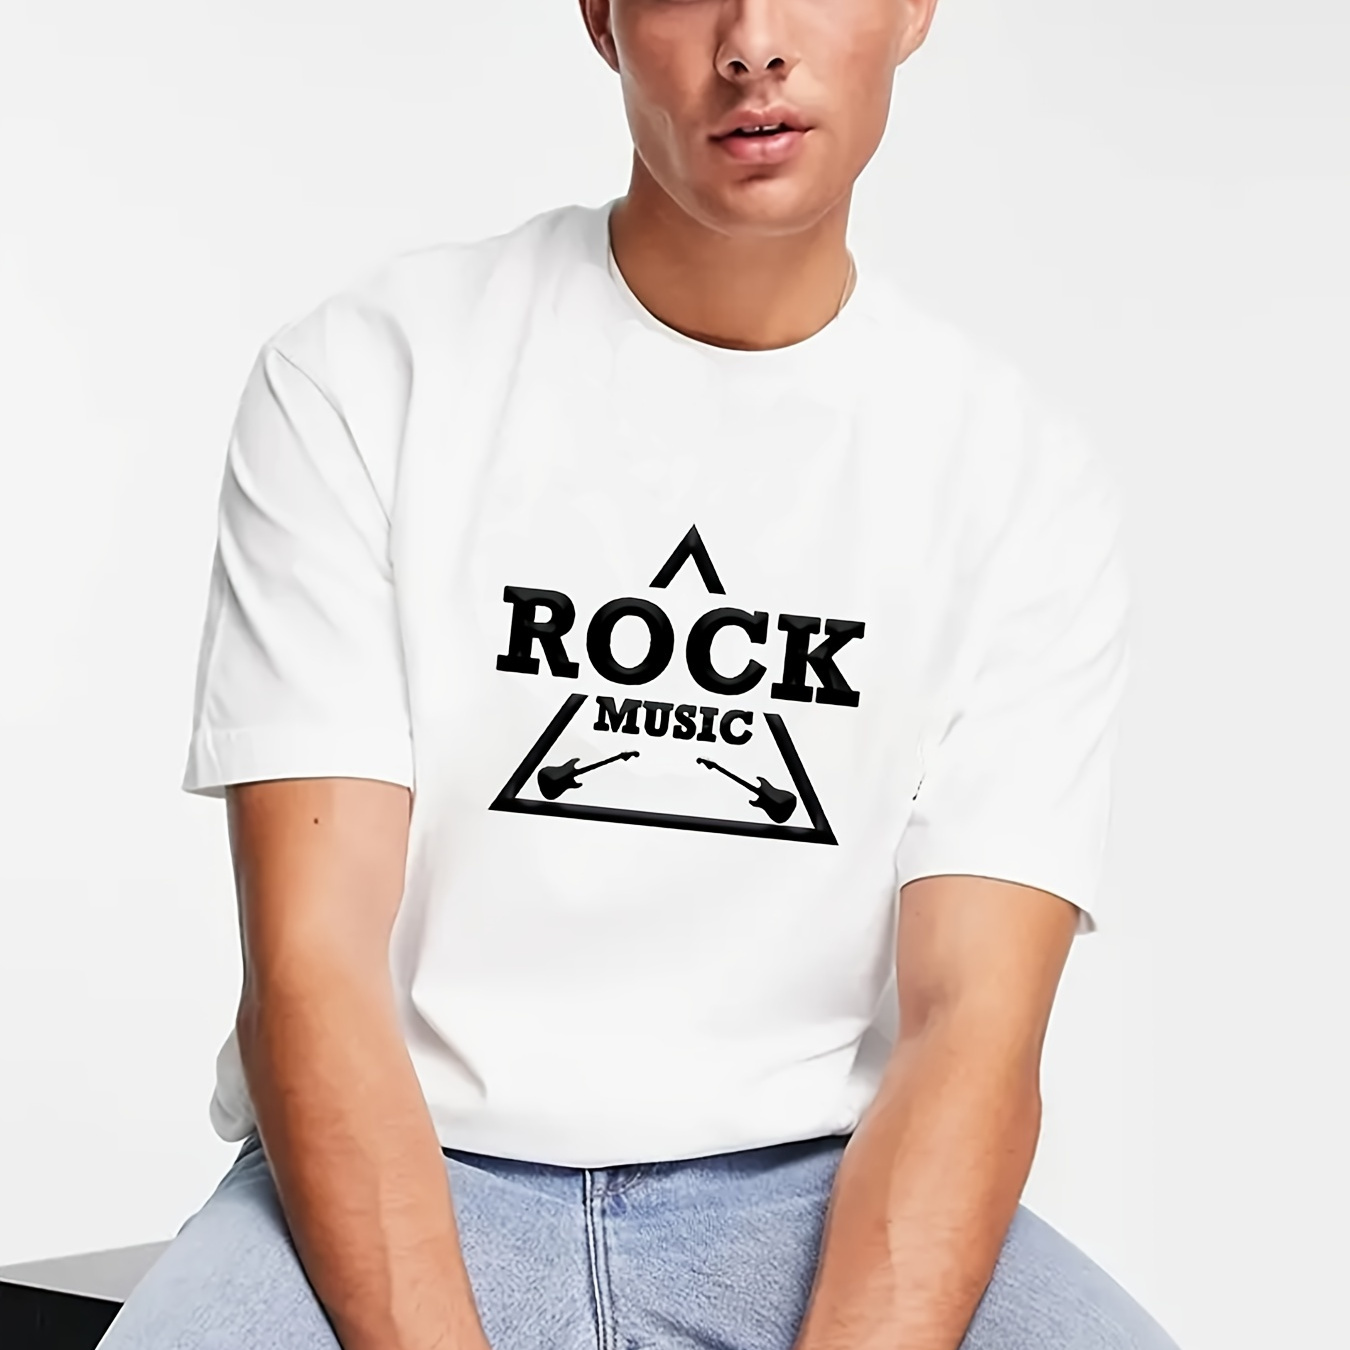 

rock Music" Pattern Print Men's Comfy Chic T-shirt, Graphic Tee Men's Summer Outdoor Clothes, Men's Clothing, Tops For Men, Gift For Men